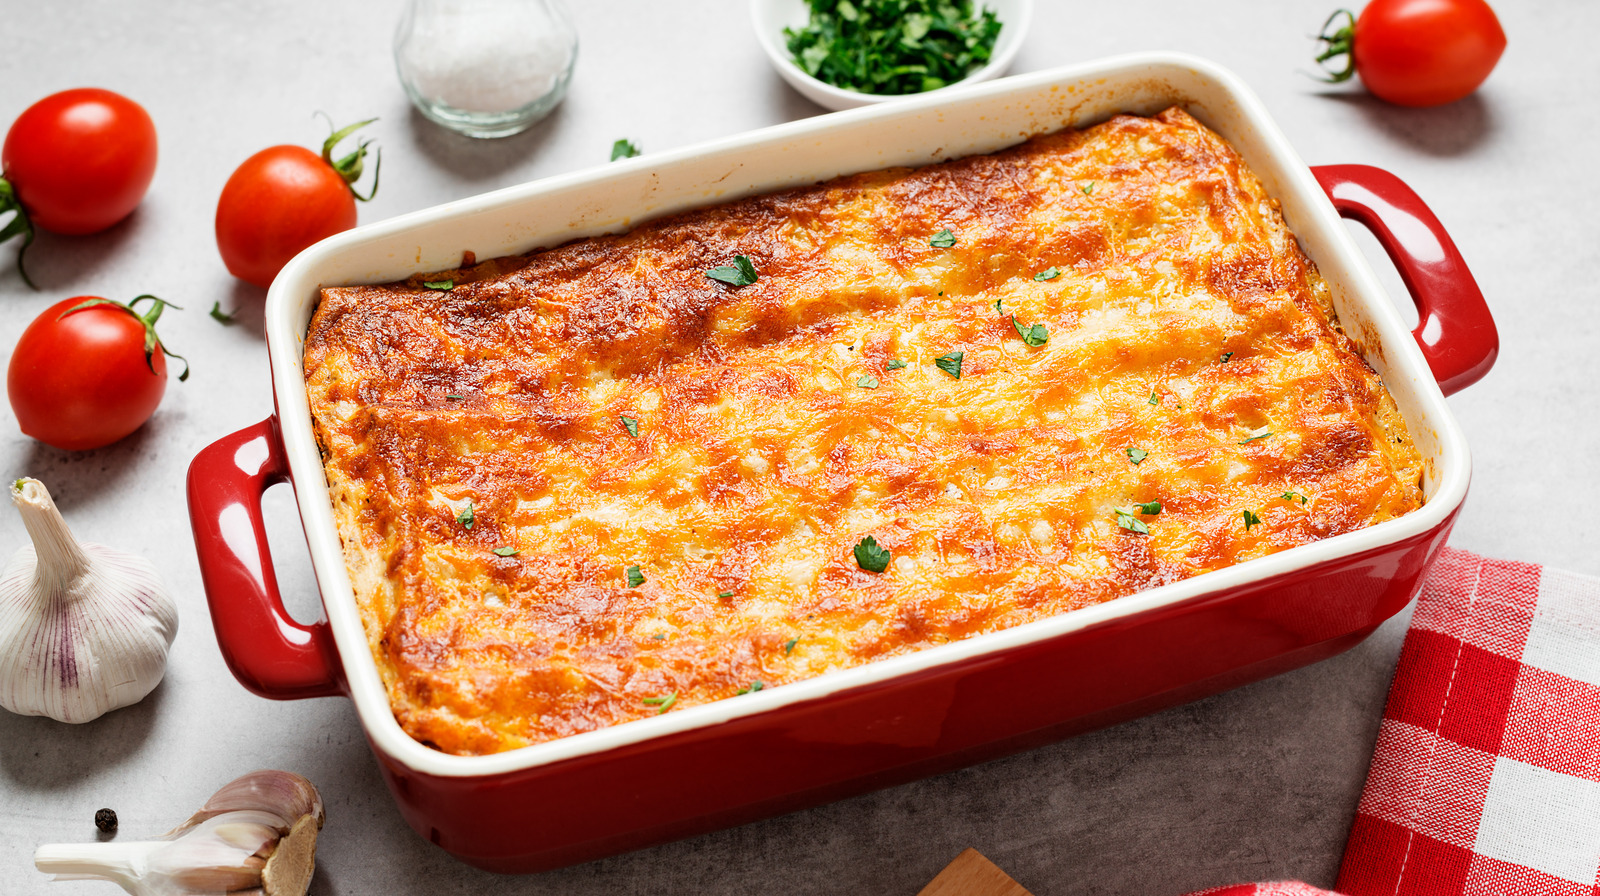 The Unexpected Ingredient That Will Majorly Upgrade Your Lasagna